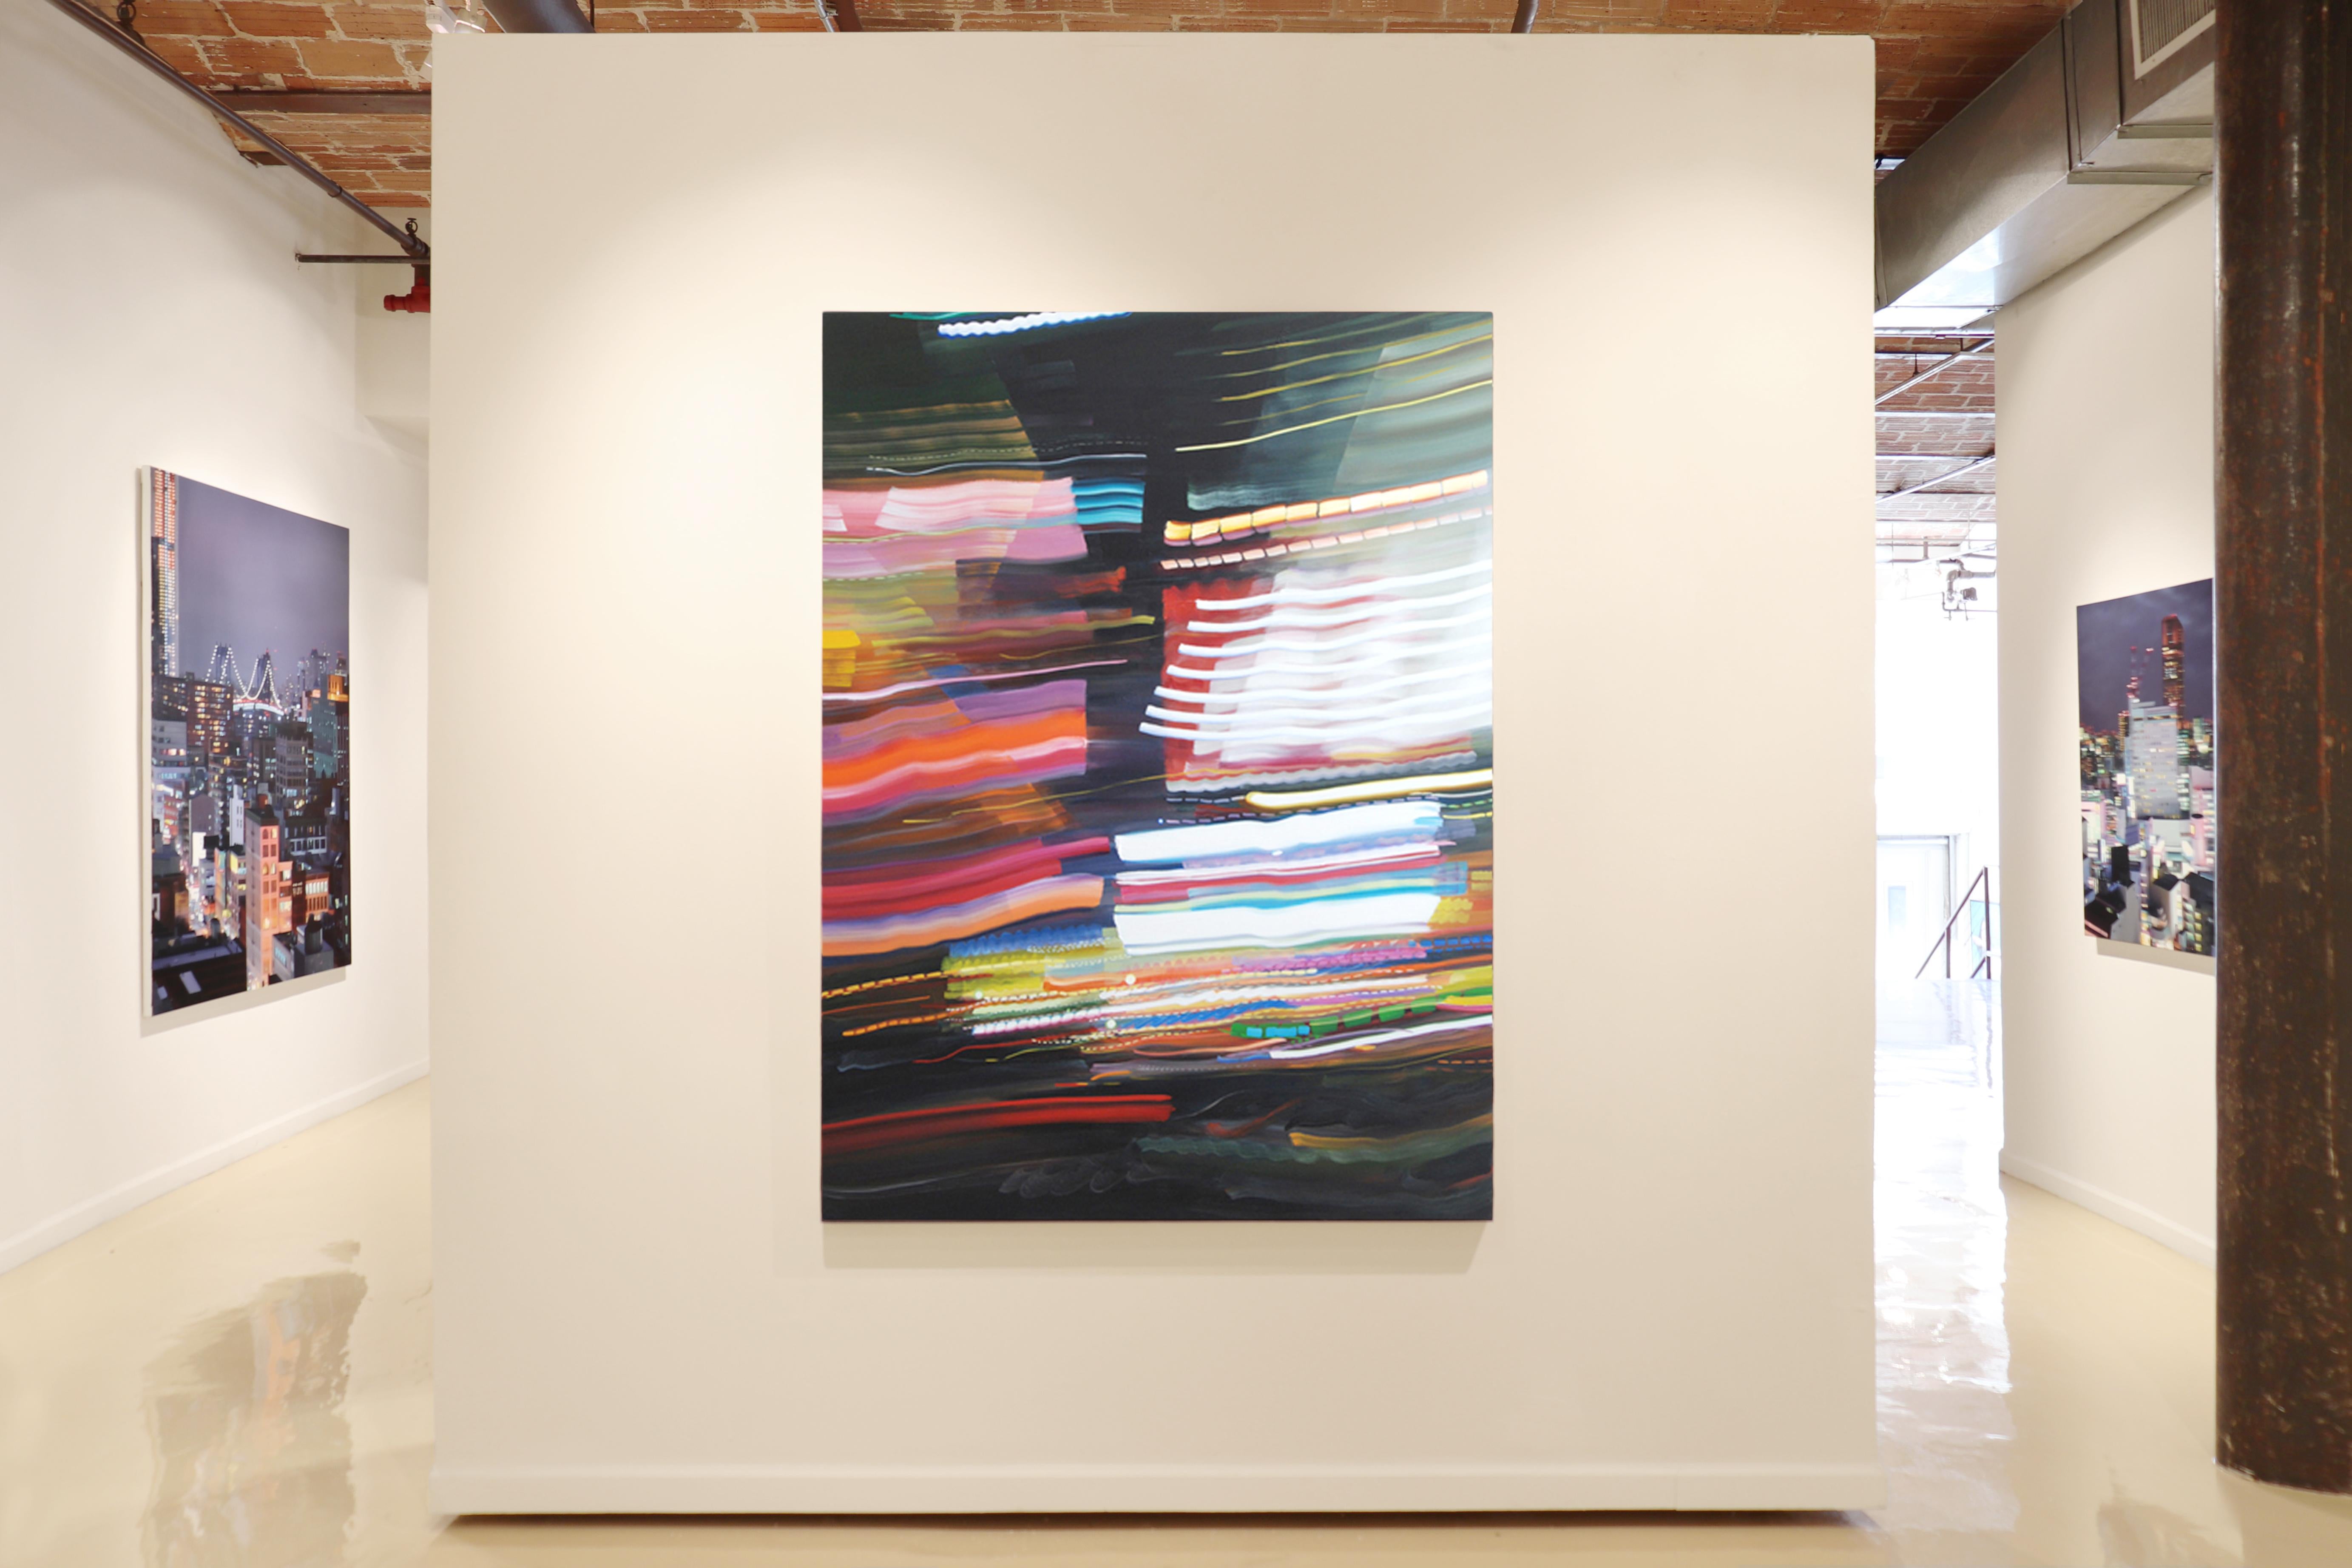 SWIFT INCIDENCE, blurry lights, NYC, city at night, neon, painterly - Painting by Alexandra Pacula